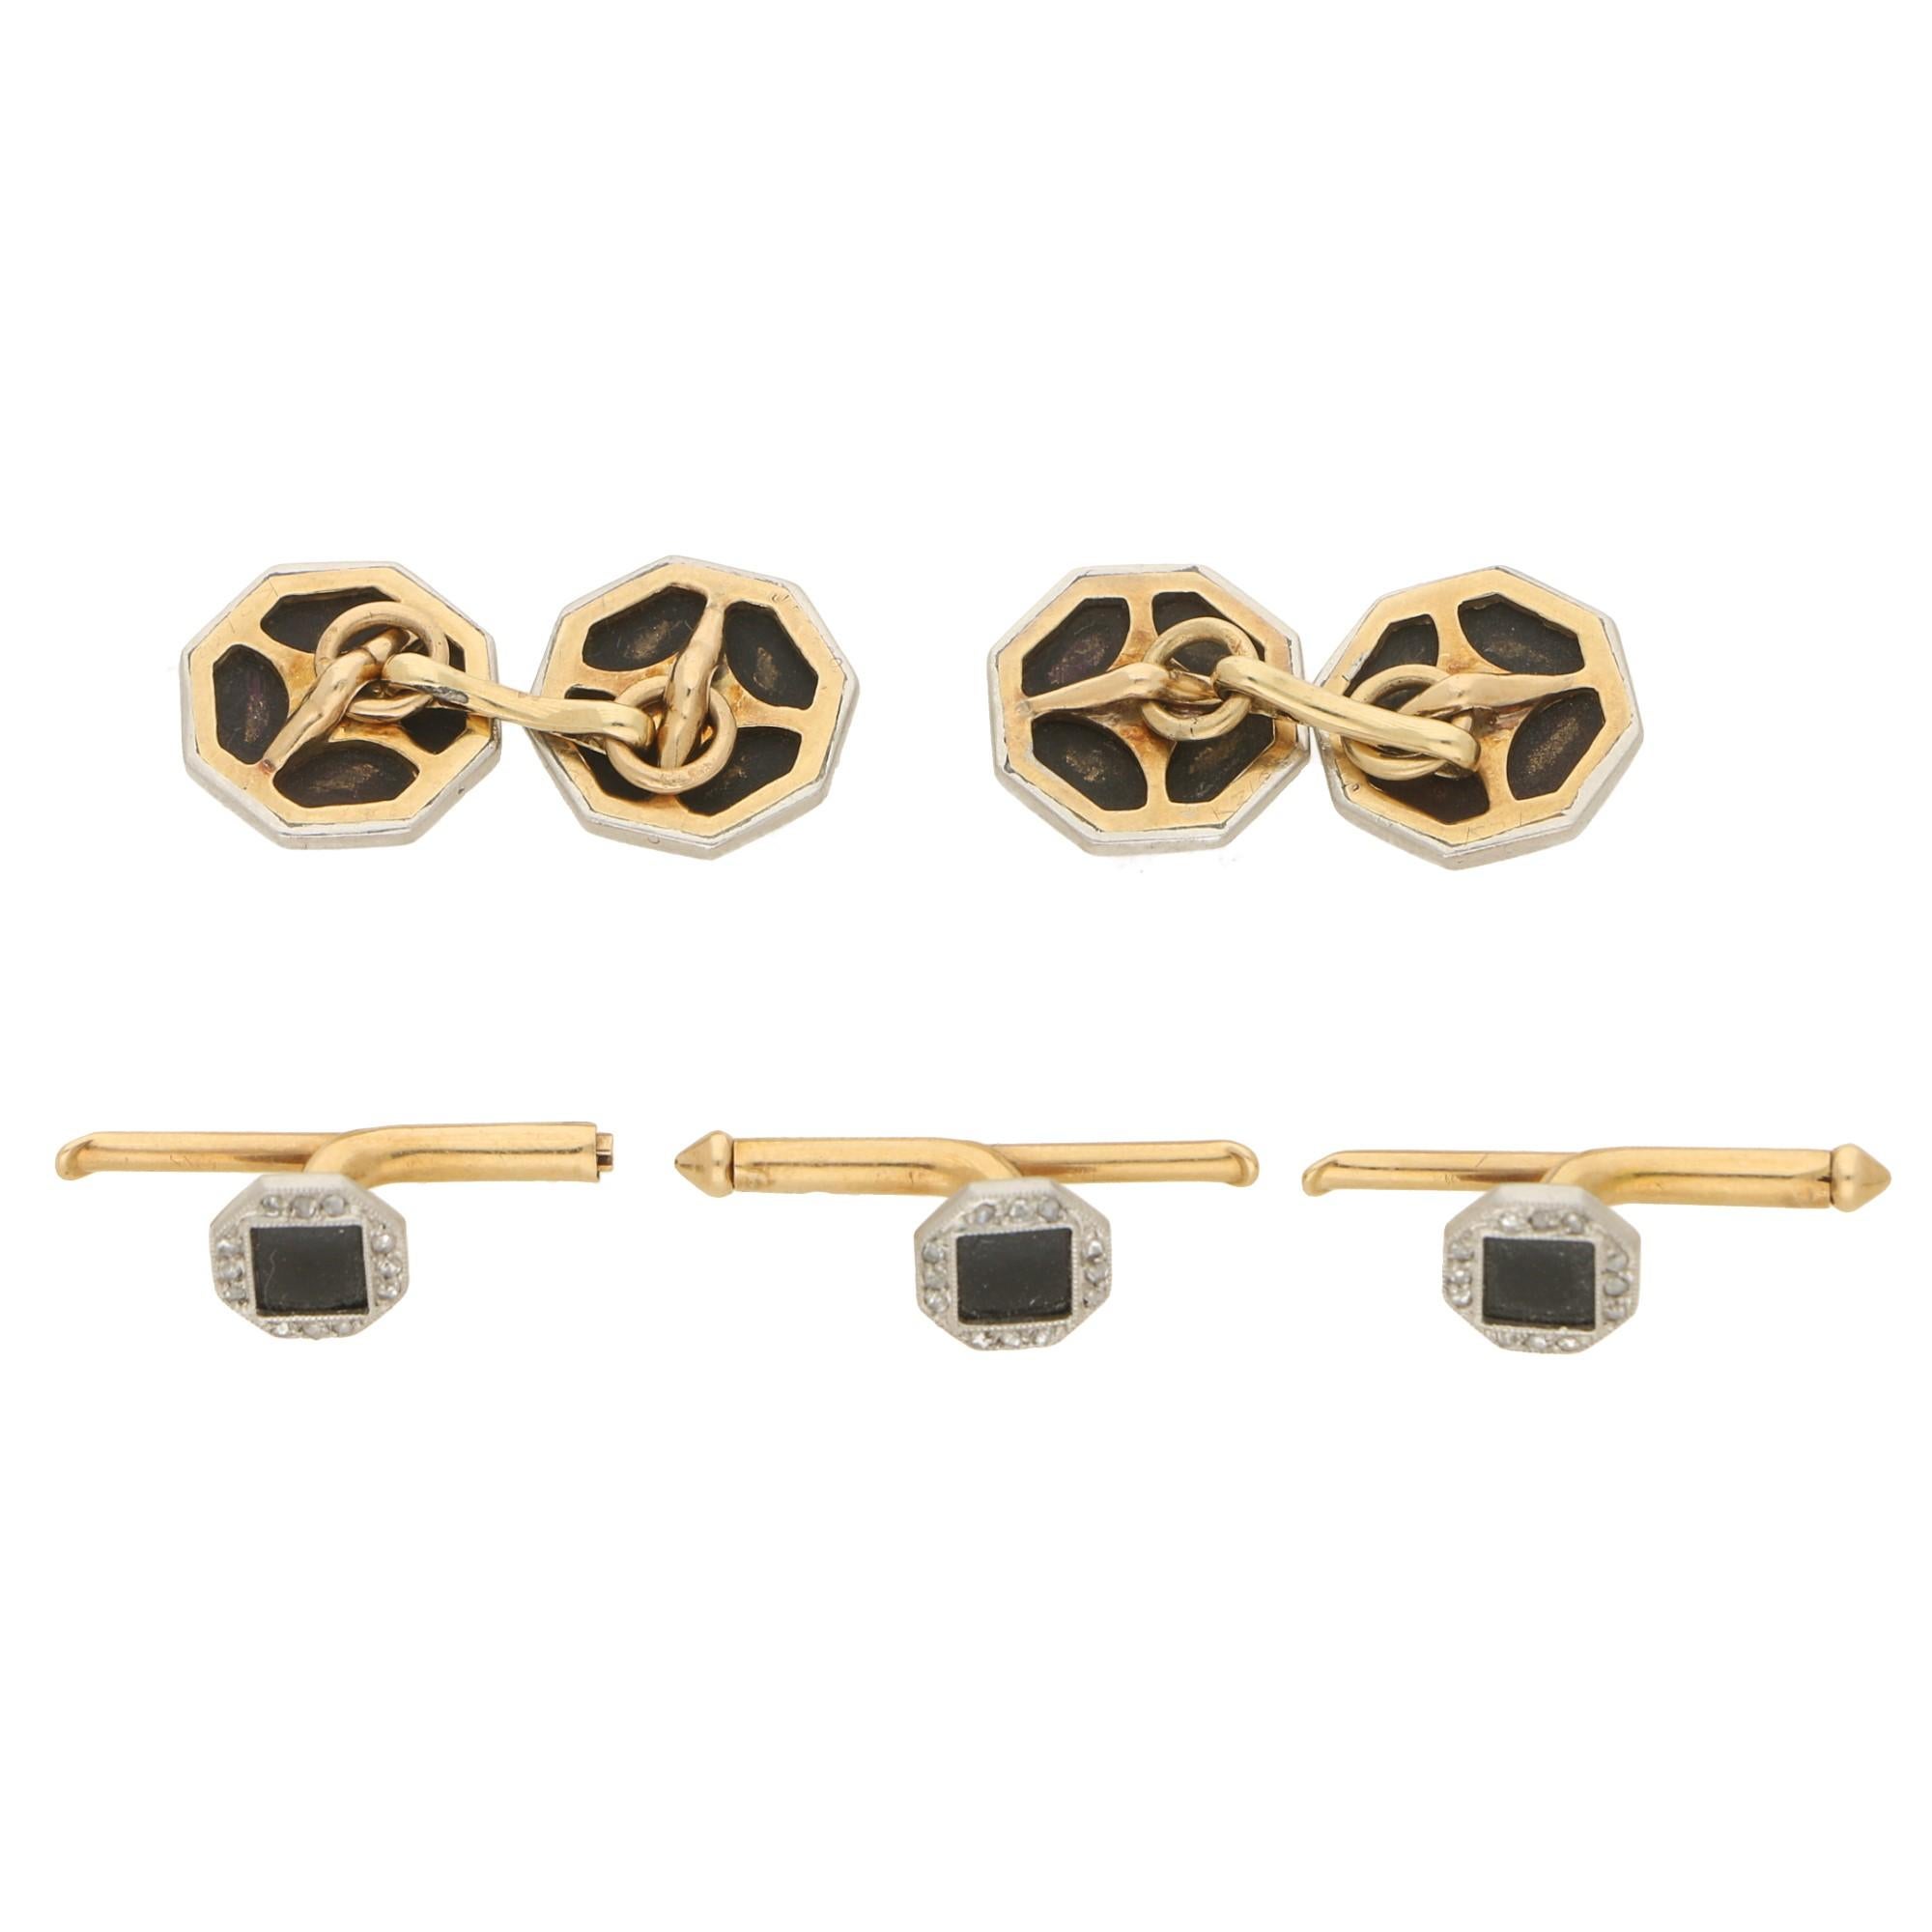 A lovely 1920’s onyx and diamond cufflink and shirt stud dress set in gold and platinum. 

The set is composed of a single pair of cufflinks and three shirt studs all of which having the same design. Each face is formed of a perfect square of onyx